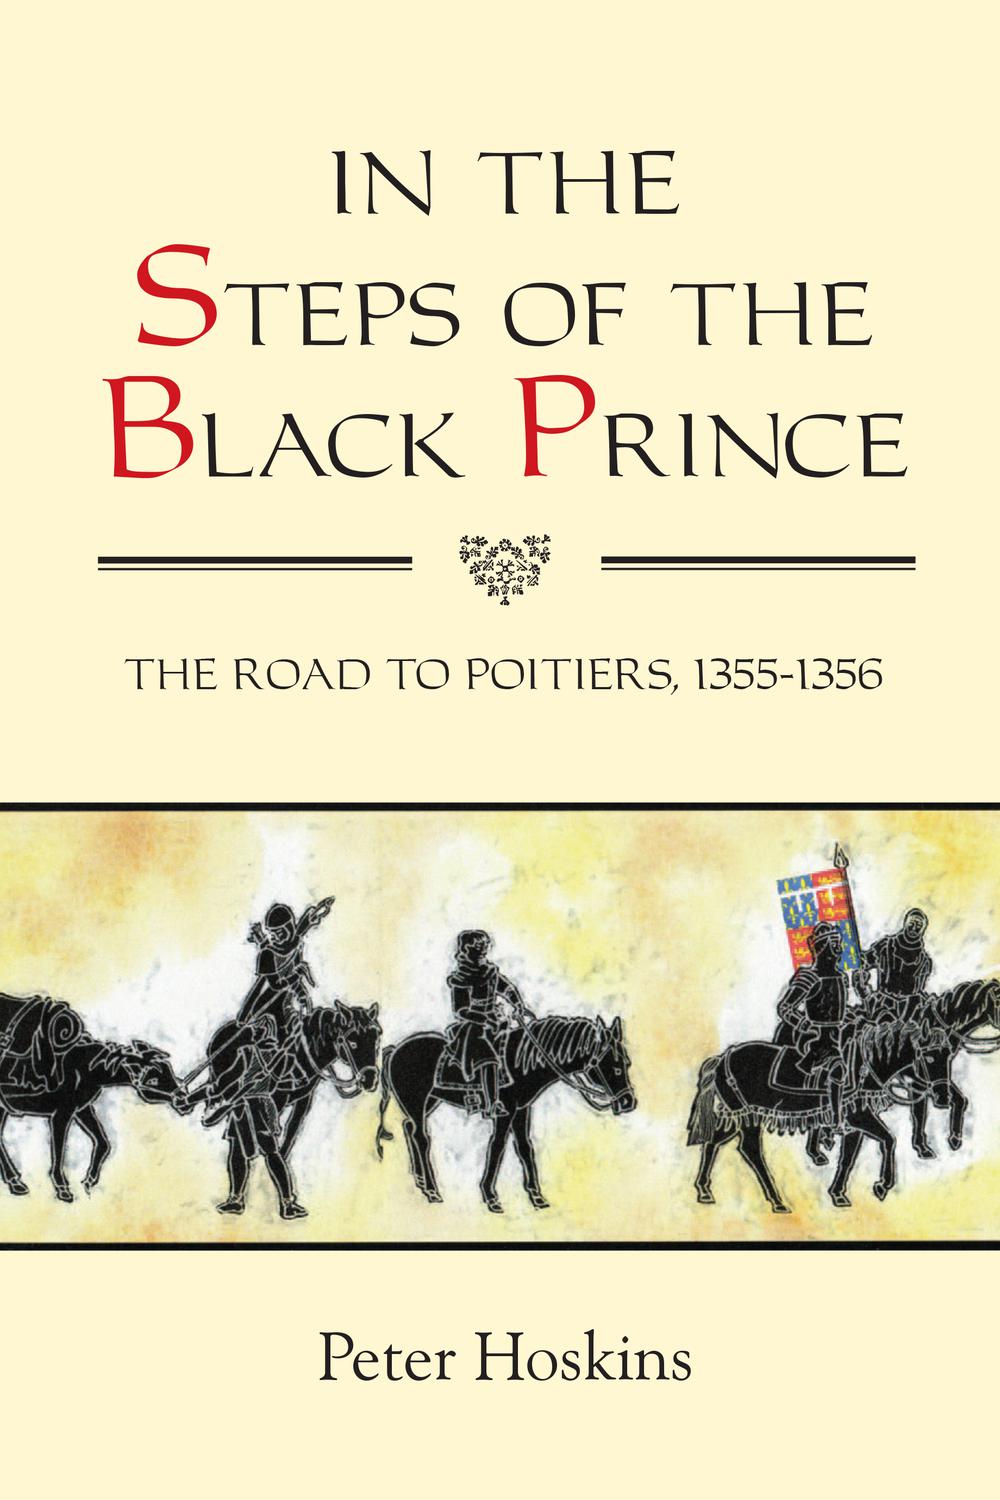 In the Steps of the Black Prince - Peter Hoskins